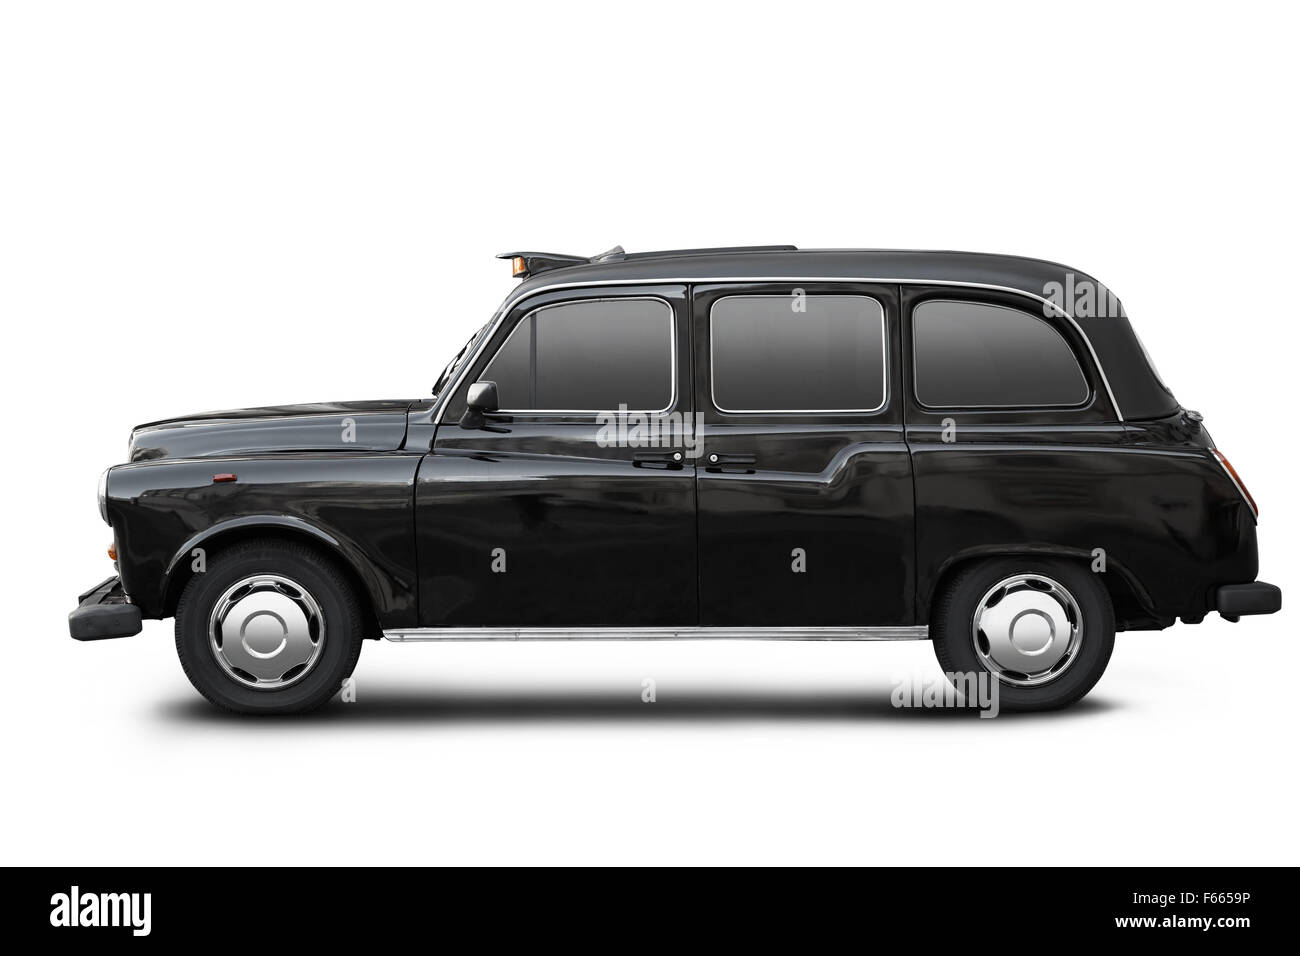 English old taxi, black cab in London isolated on white, clipping path included Stock Photo